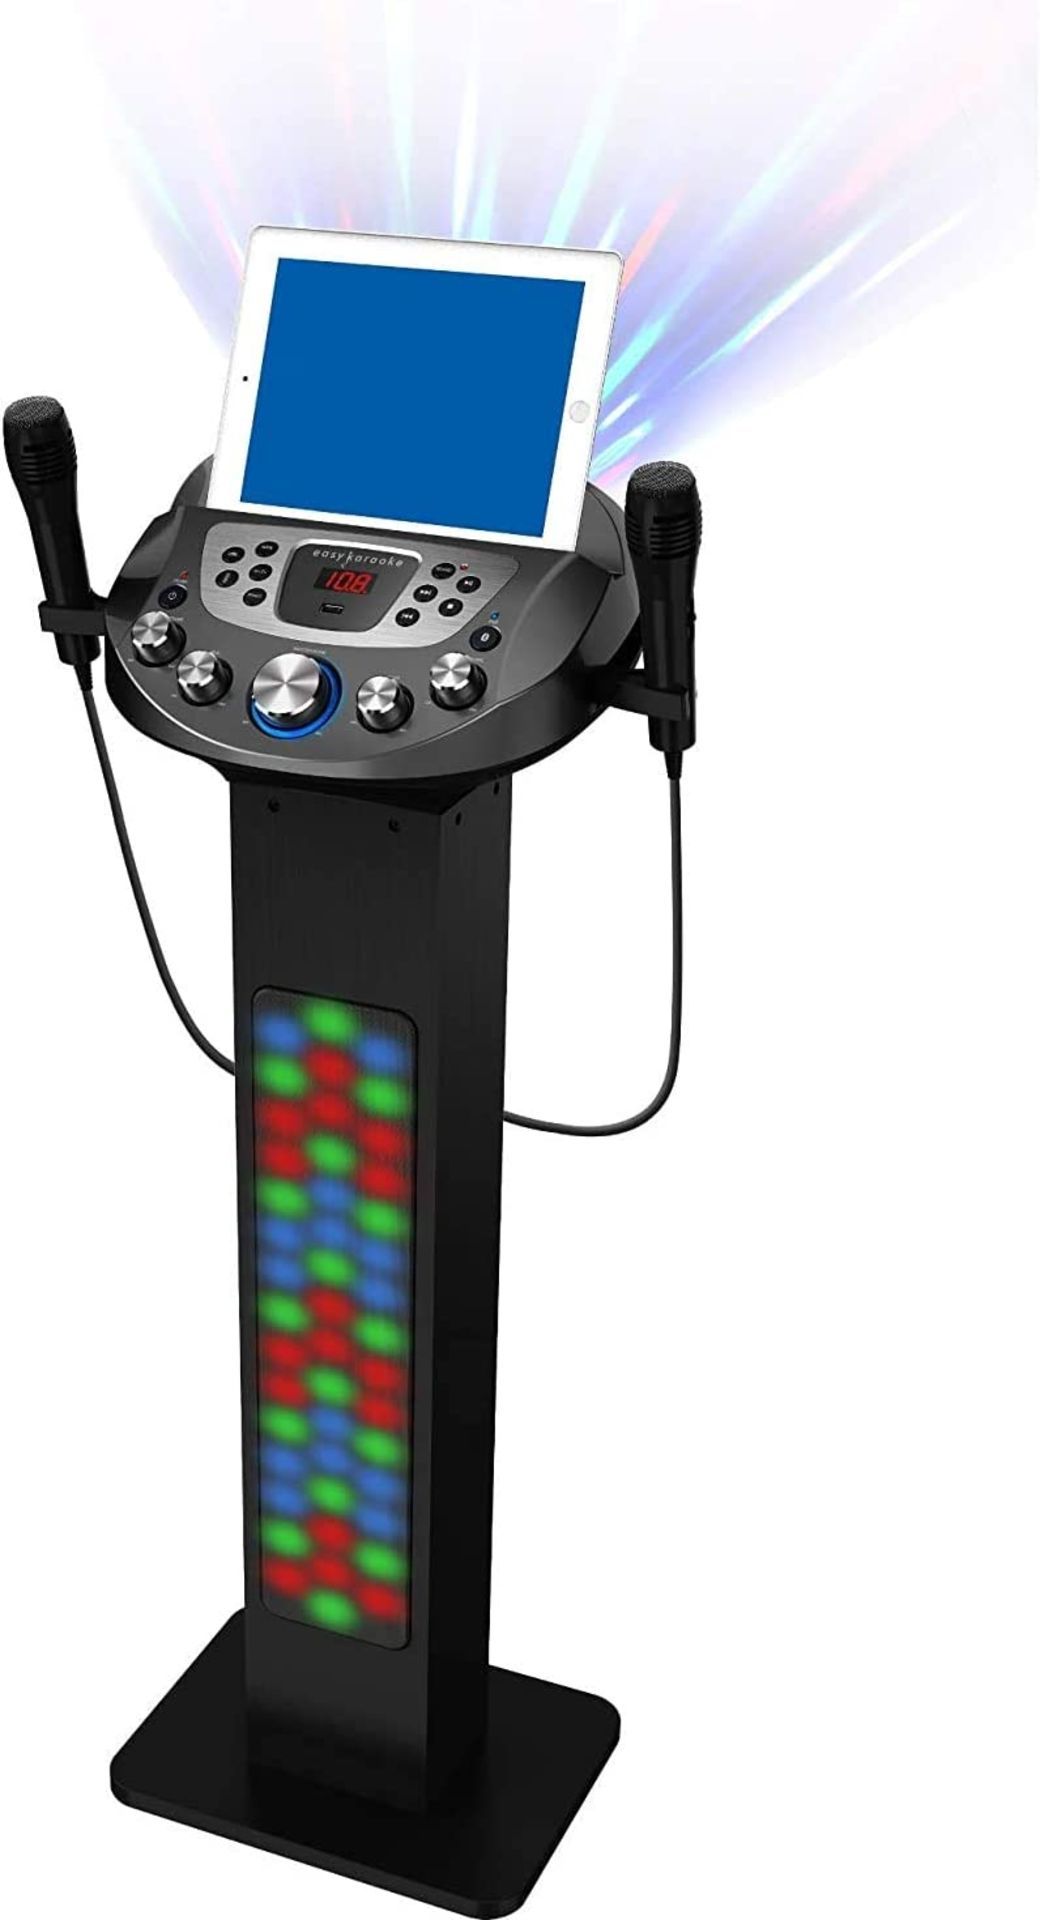 BRAND NEW EASY KARAOKE PARTY PORTABLE BLUETOOTH KARAOKE SYSTEM BUILT IN DOUBLE SIDED LED LIGHT